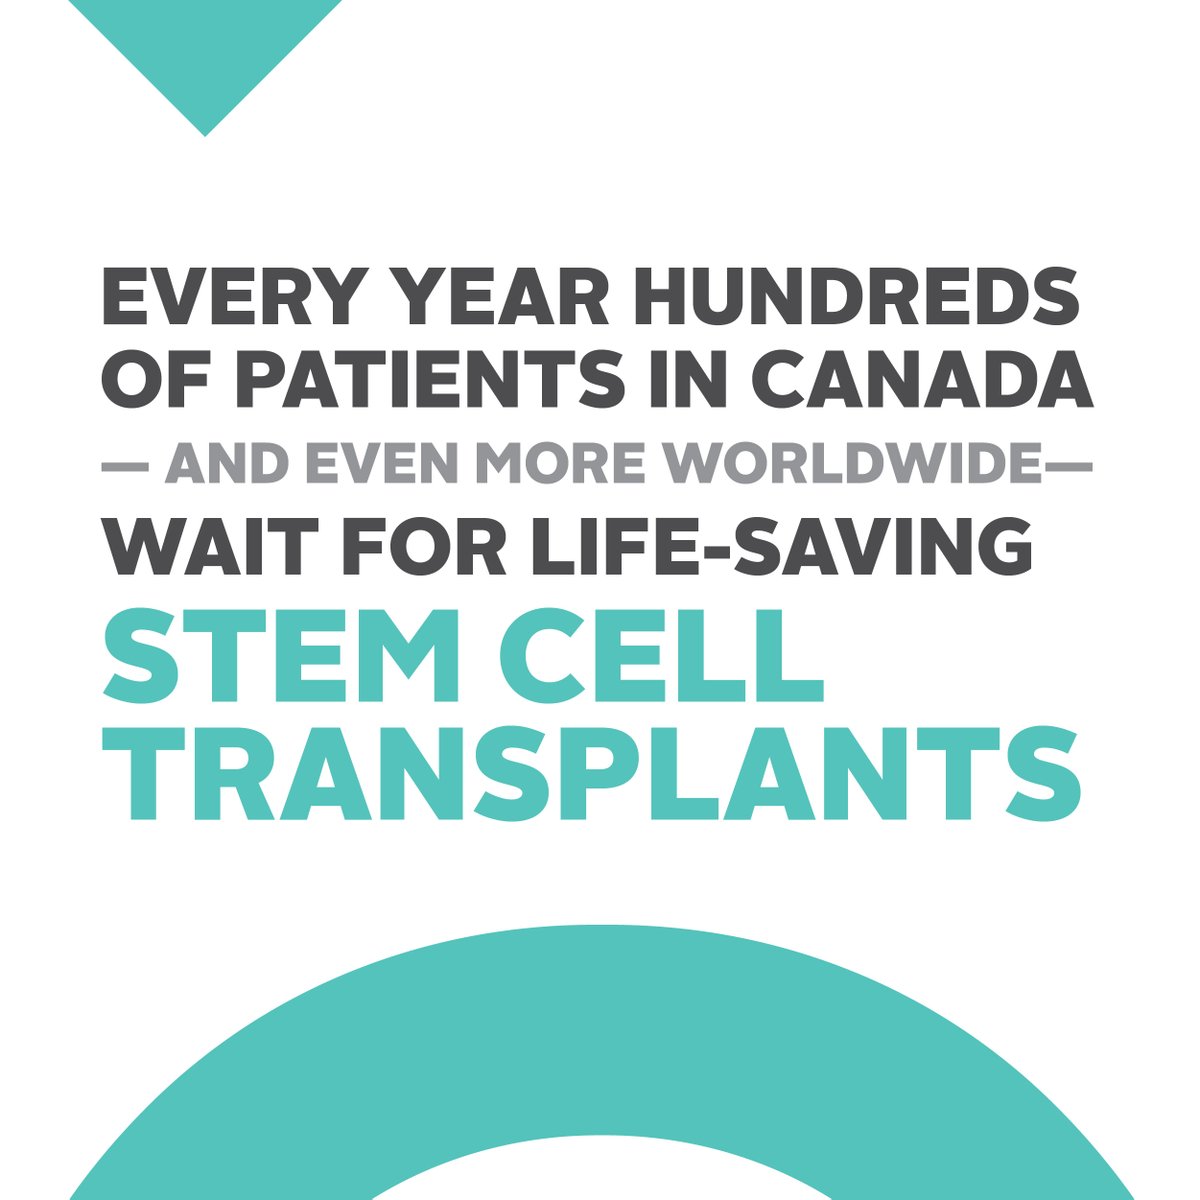 Stem cell transplants can treat over 80 diseases and disorders, including blood cancers such as leukemia, lymphoma or myeloma! Our bodies constantly make stem cells because without them, the consequences can dire. Join the stem cell registry: ow.ly/FJLI50PAwoj